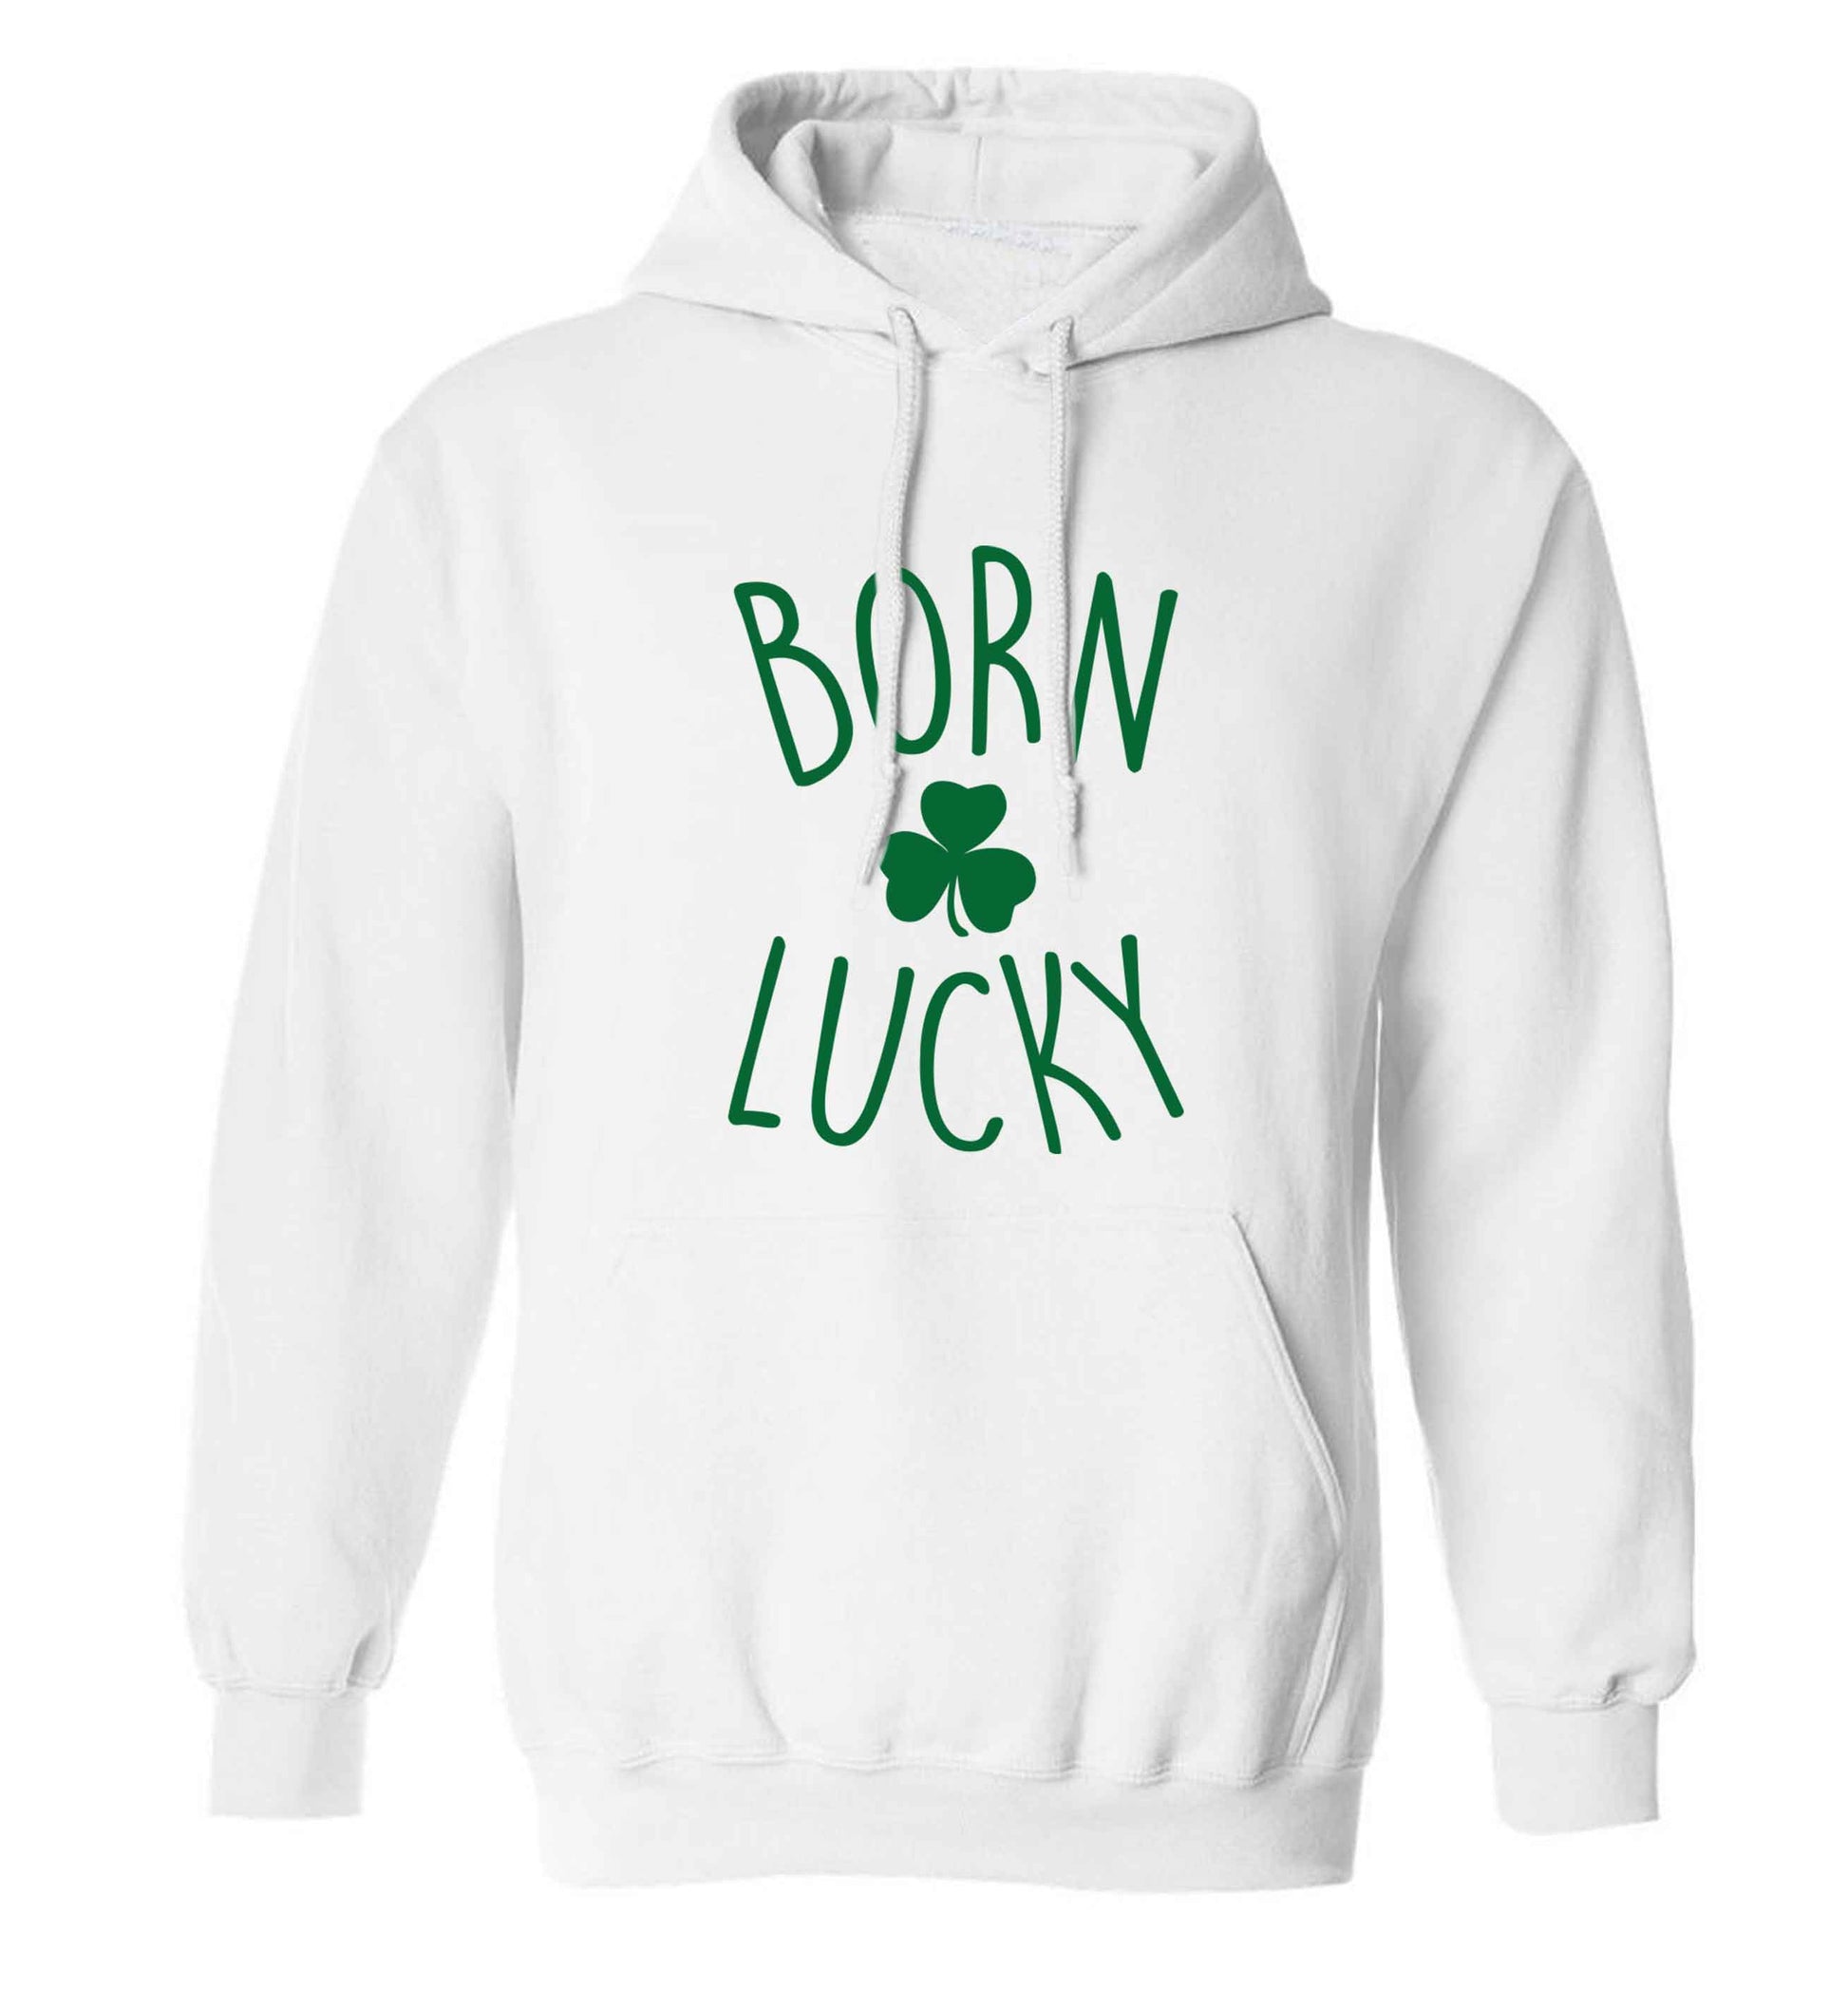 Born Lucky adults unisex white hoodie 2XL